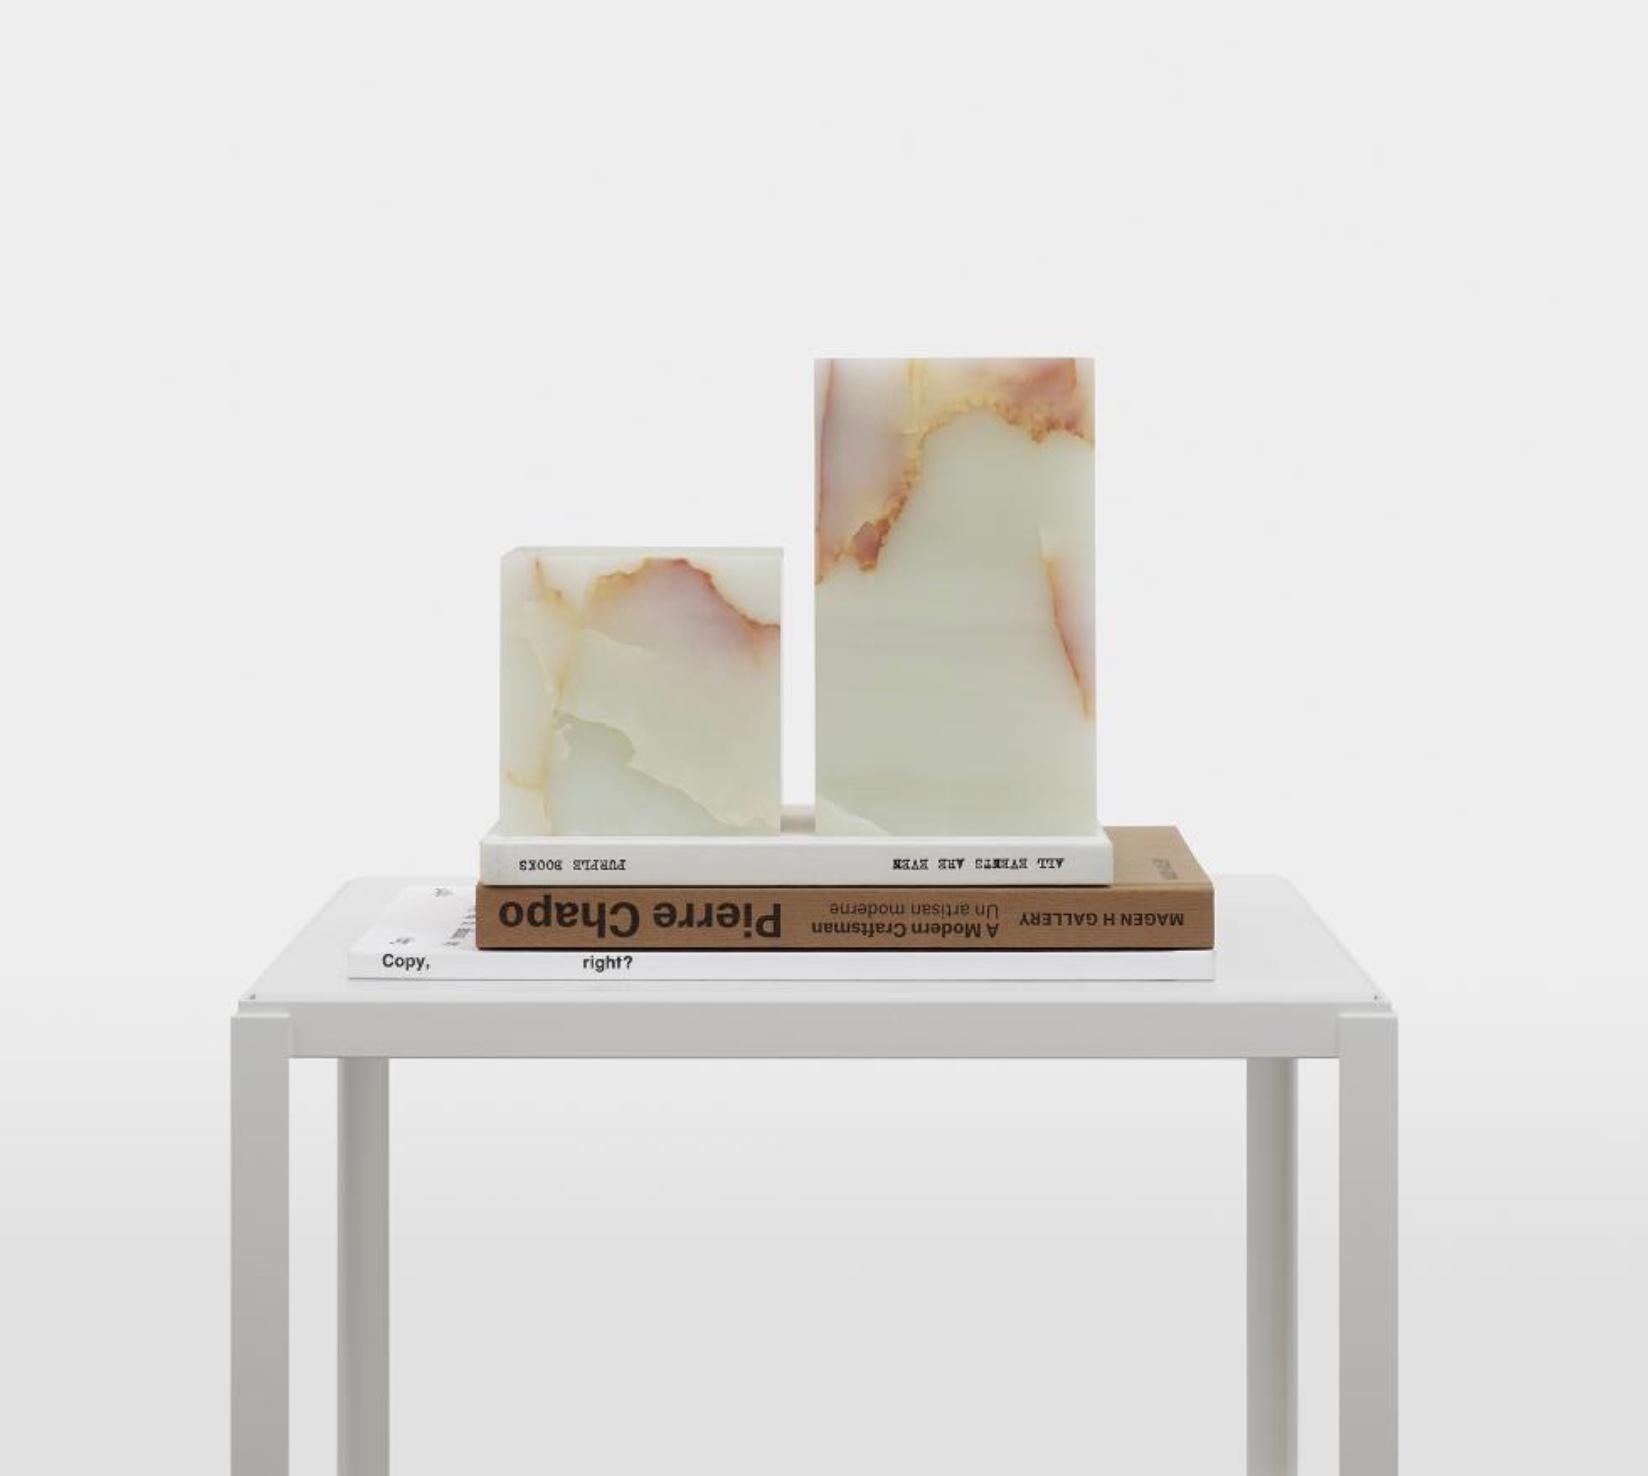 Philipp Mainzer Set of 2 'Stop' Bookends in Onyx for E15 Selected. One 10cm version and one 17cm version. New, current production.

With its cubic form, the book end STOP ONYX is a valuable accessory. Carved from finest onyx, chosen in pale green